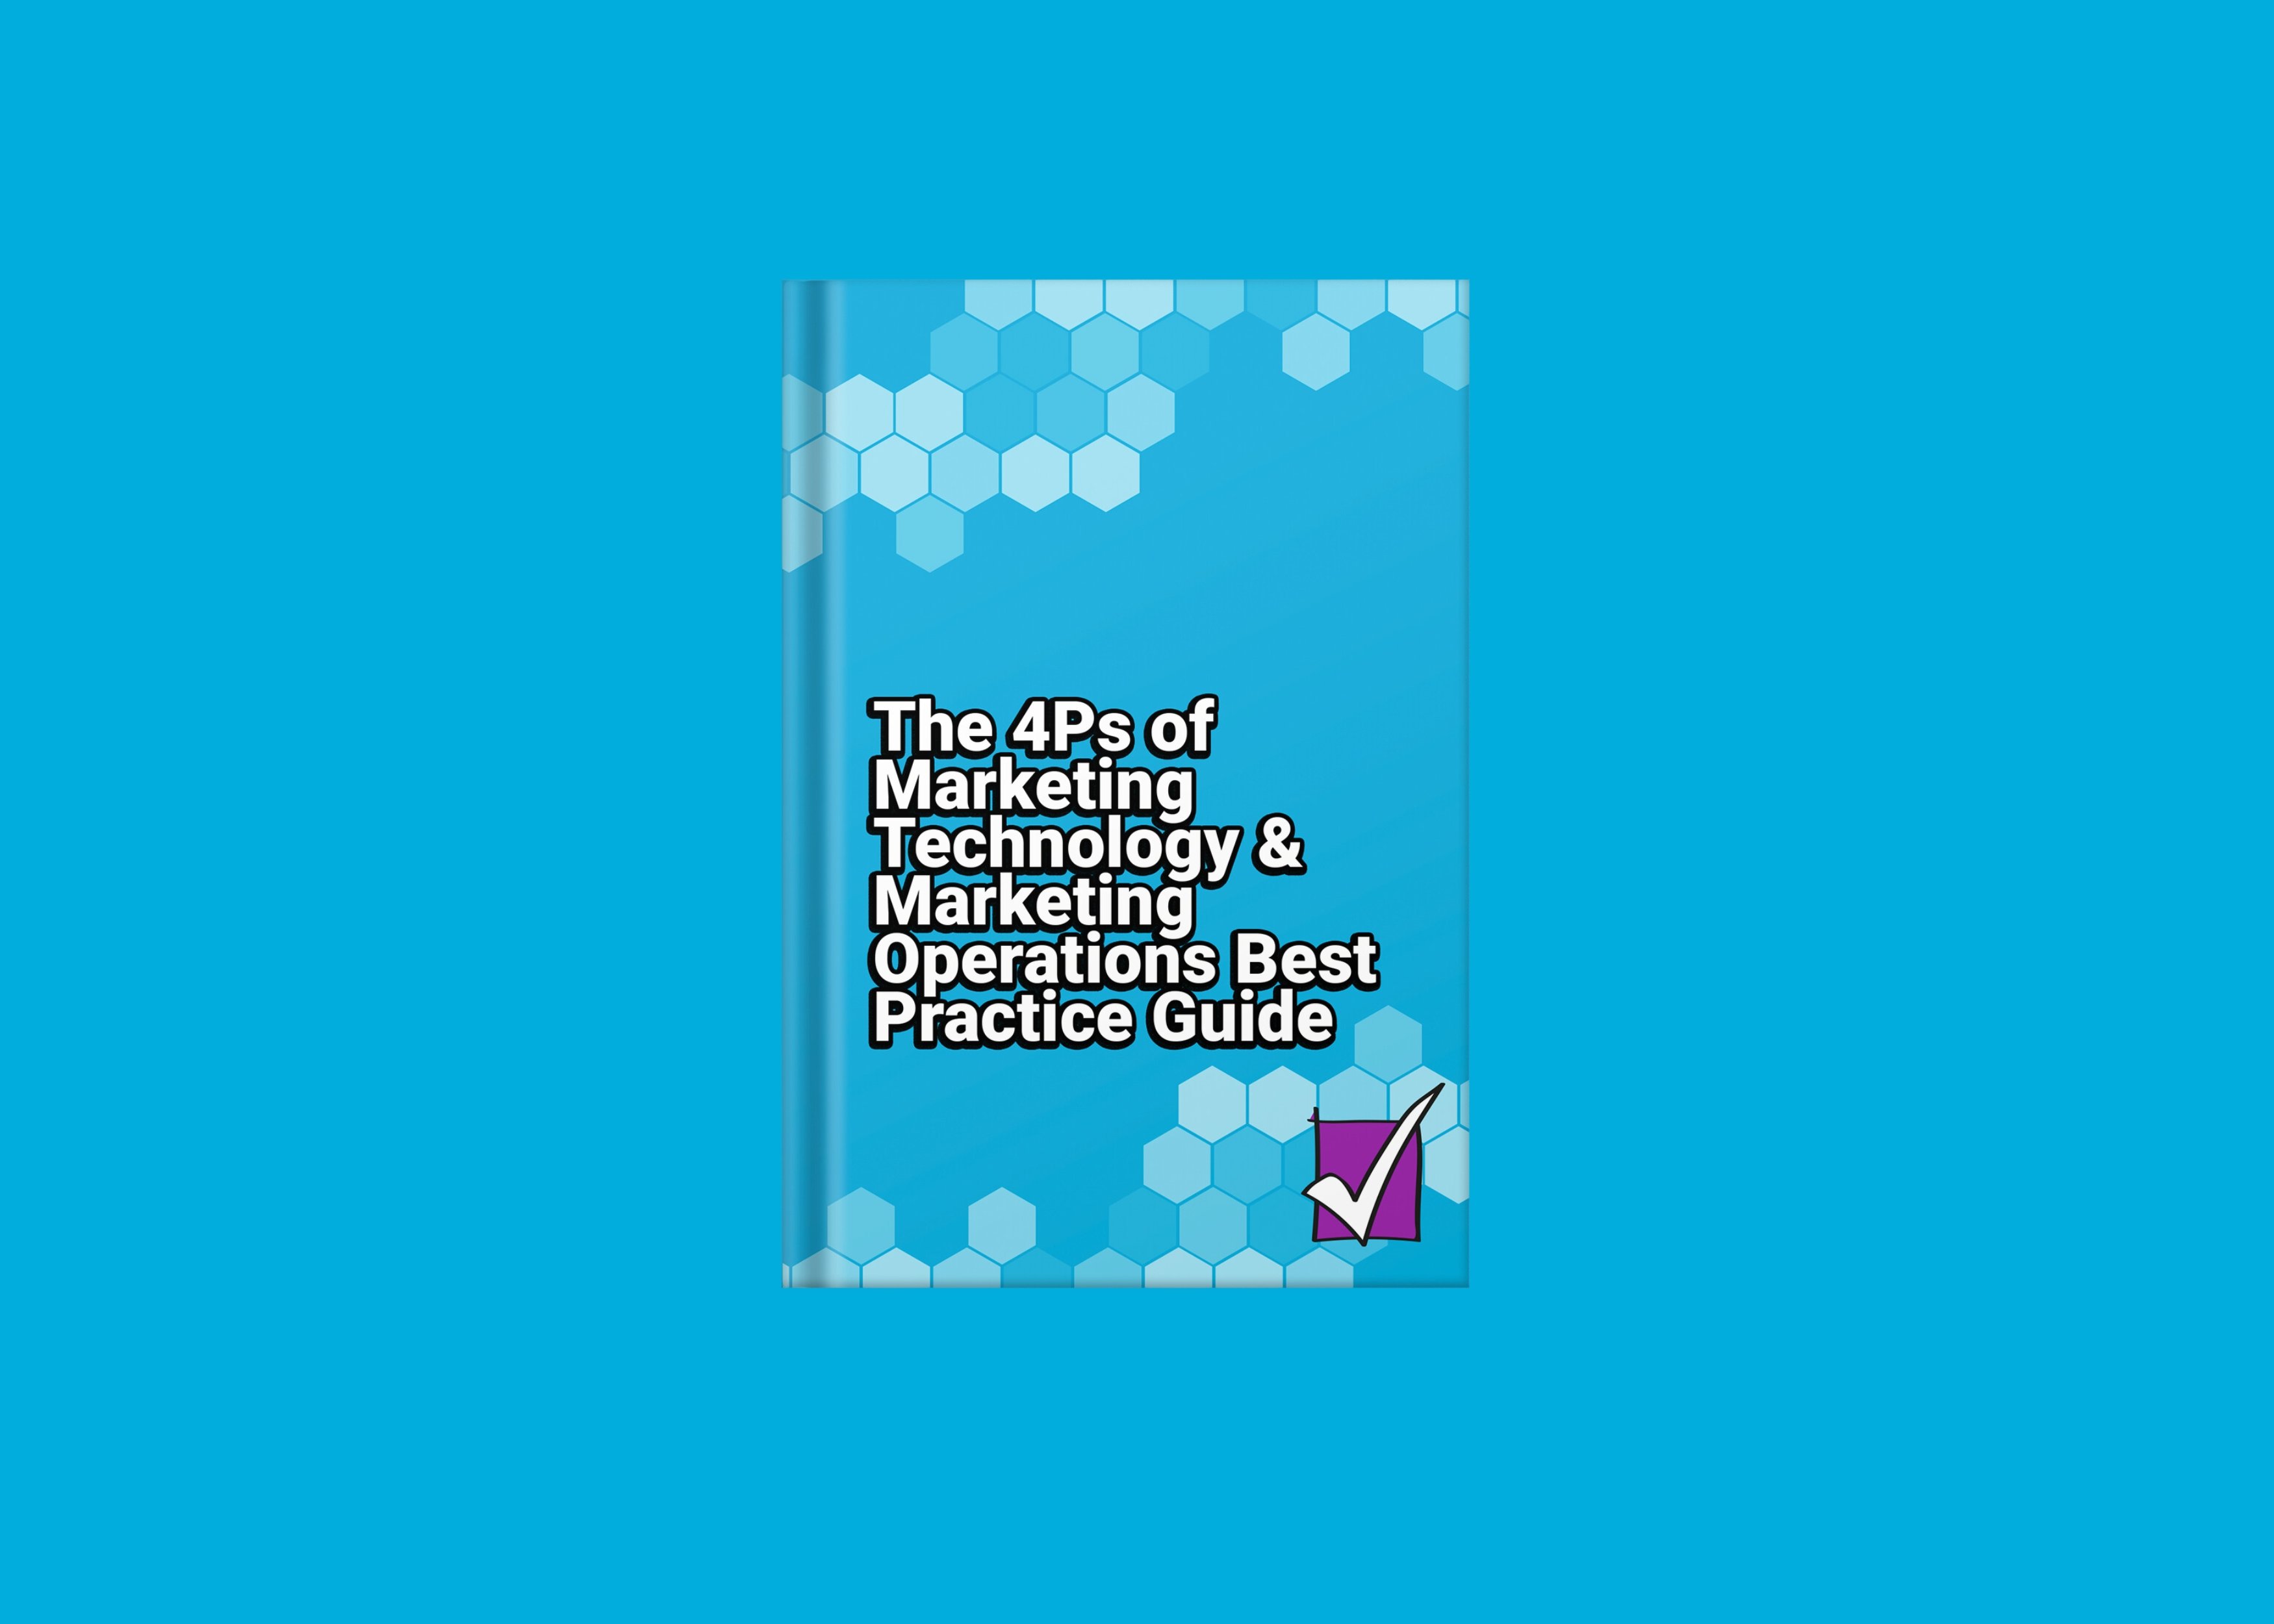 Ebook-The 4Ps of Martech & Marketing Operations Best Practice Guide-3500x2500px